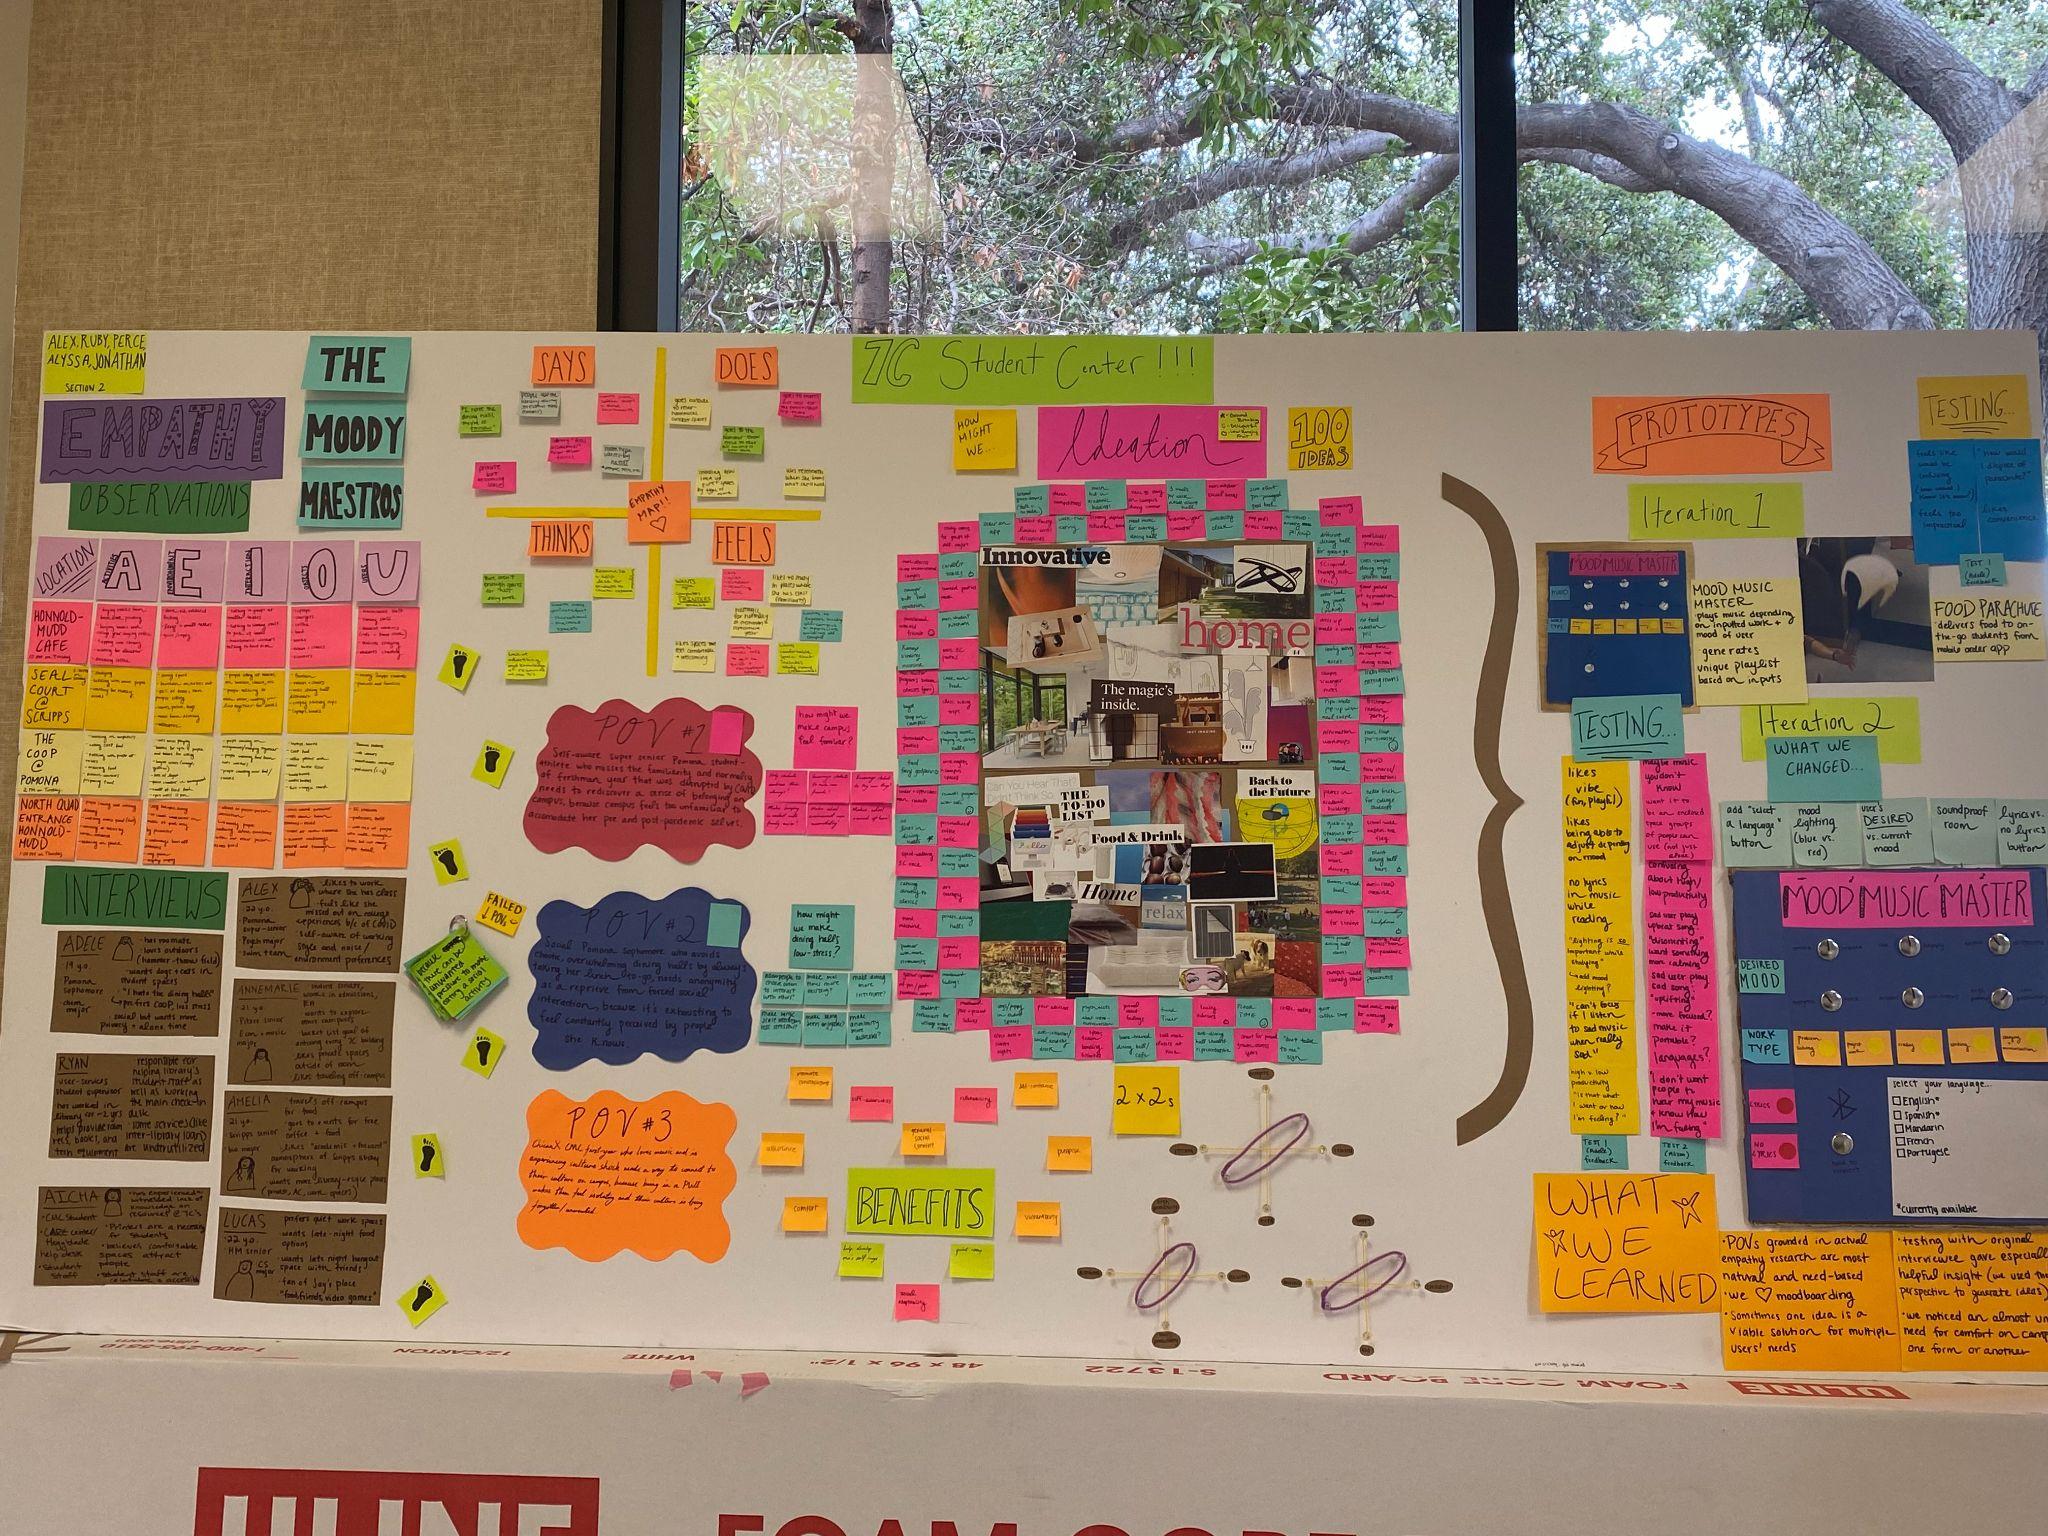 Poster displaying ideas with colorful sticky notes and stickers